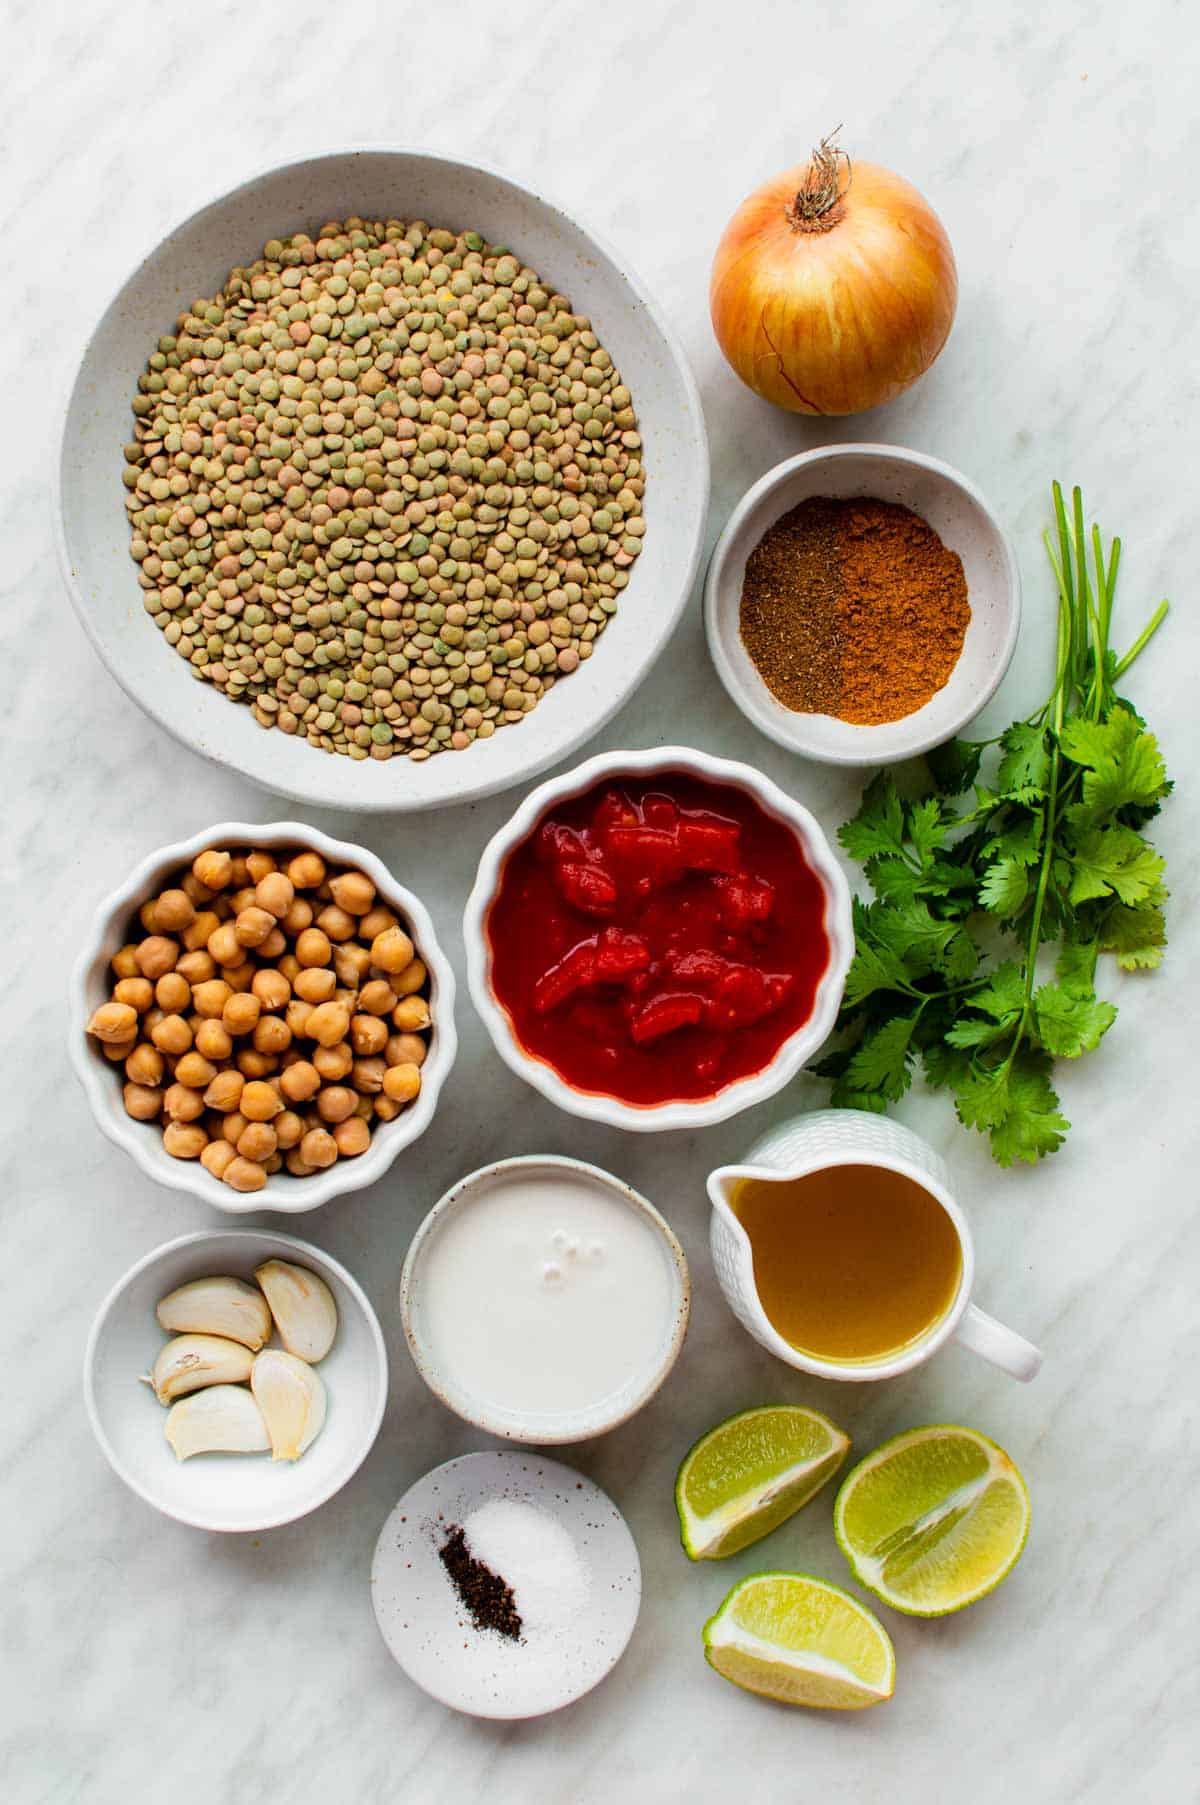 Gathered ingredients for making chickpea and lentil curry.